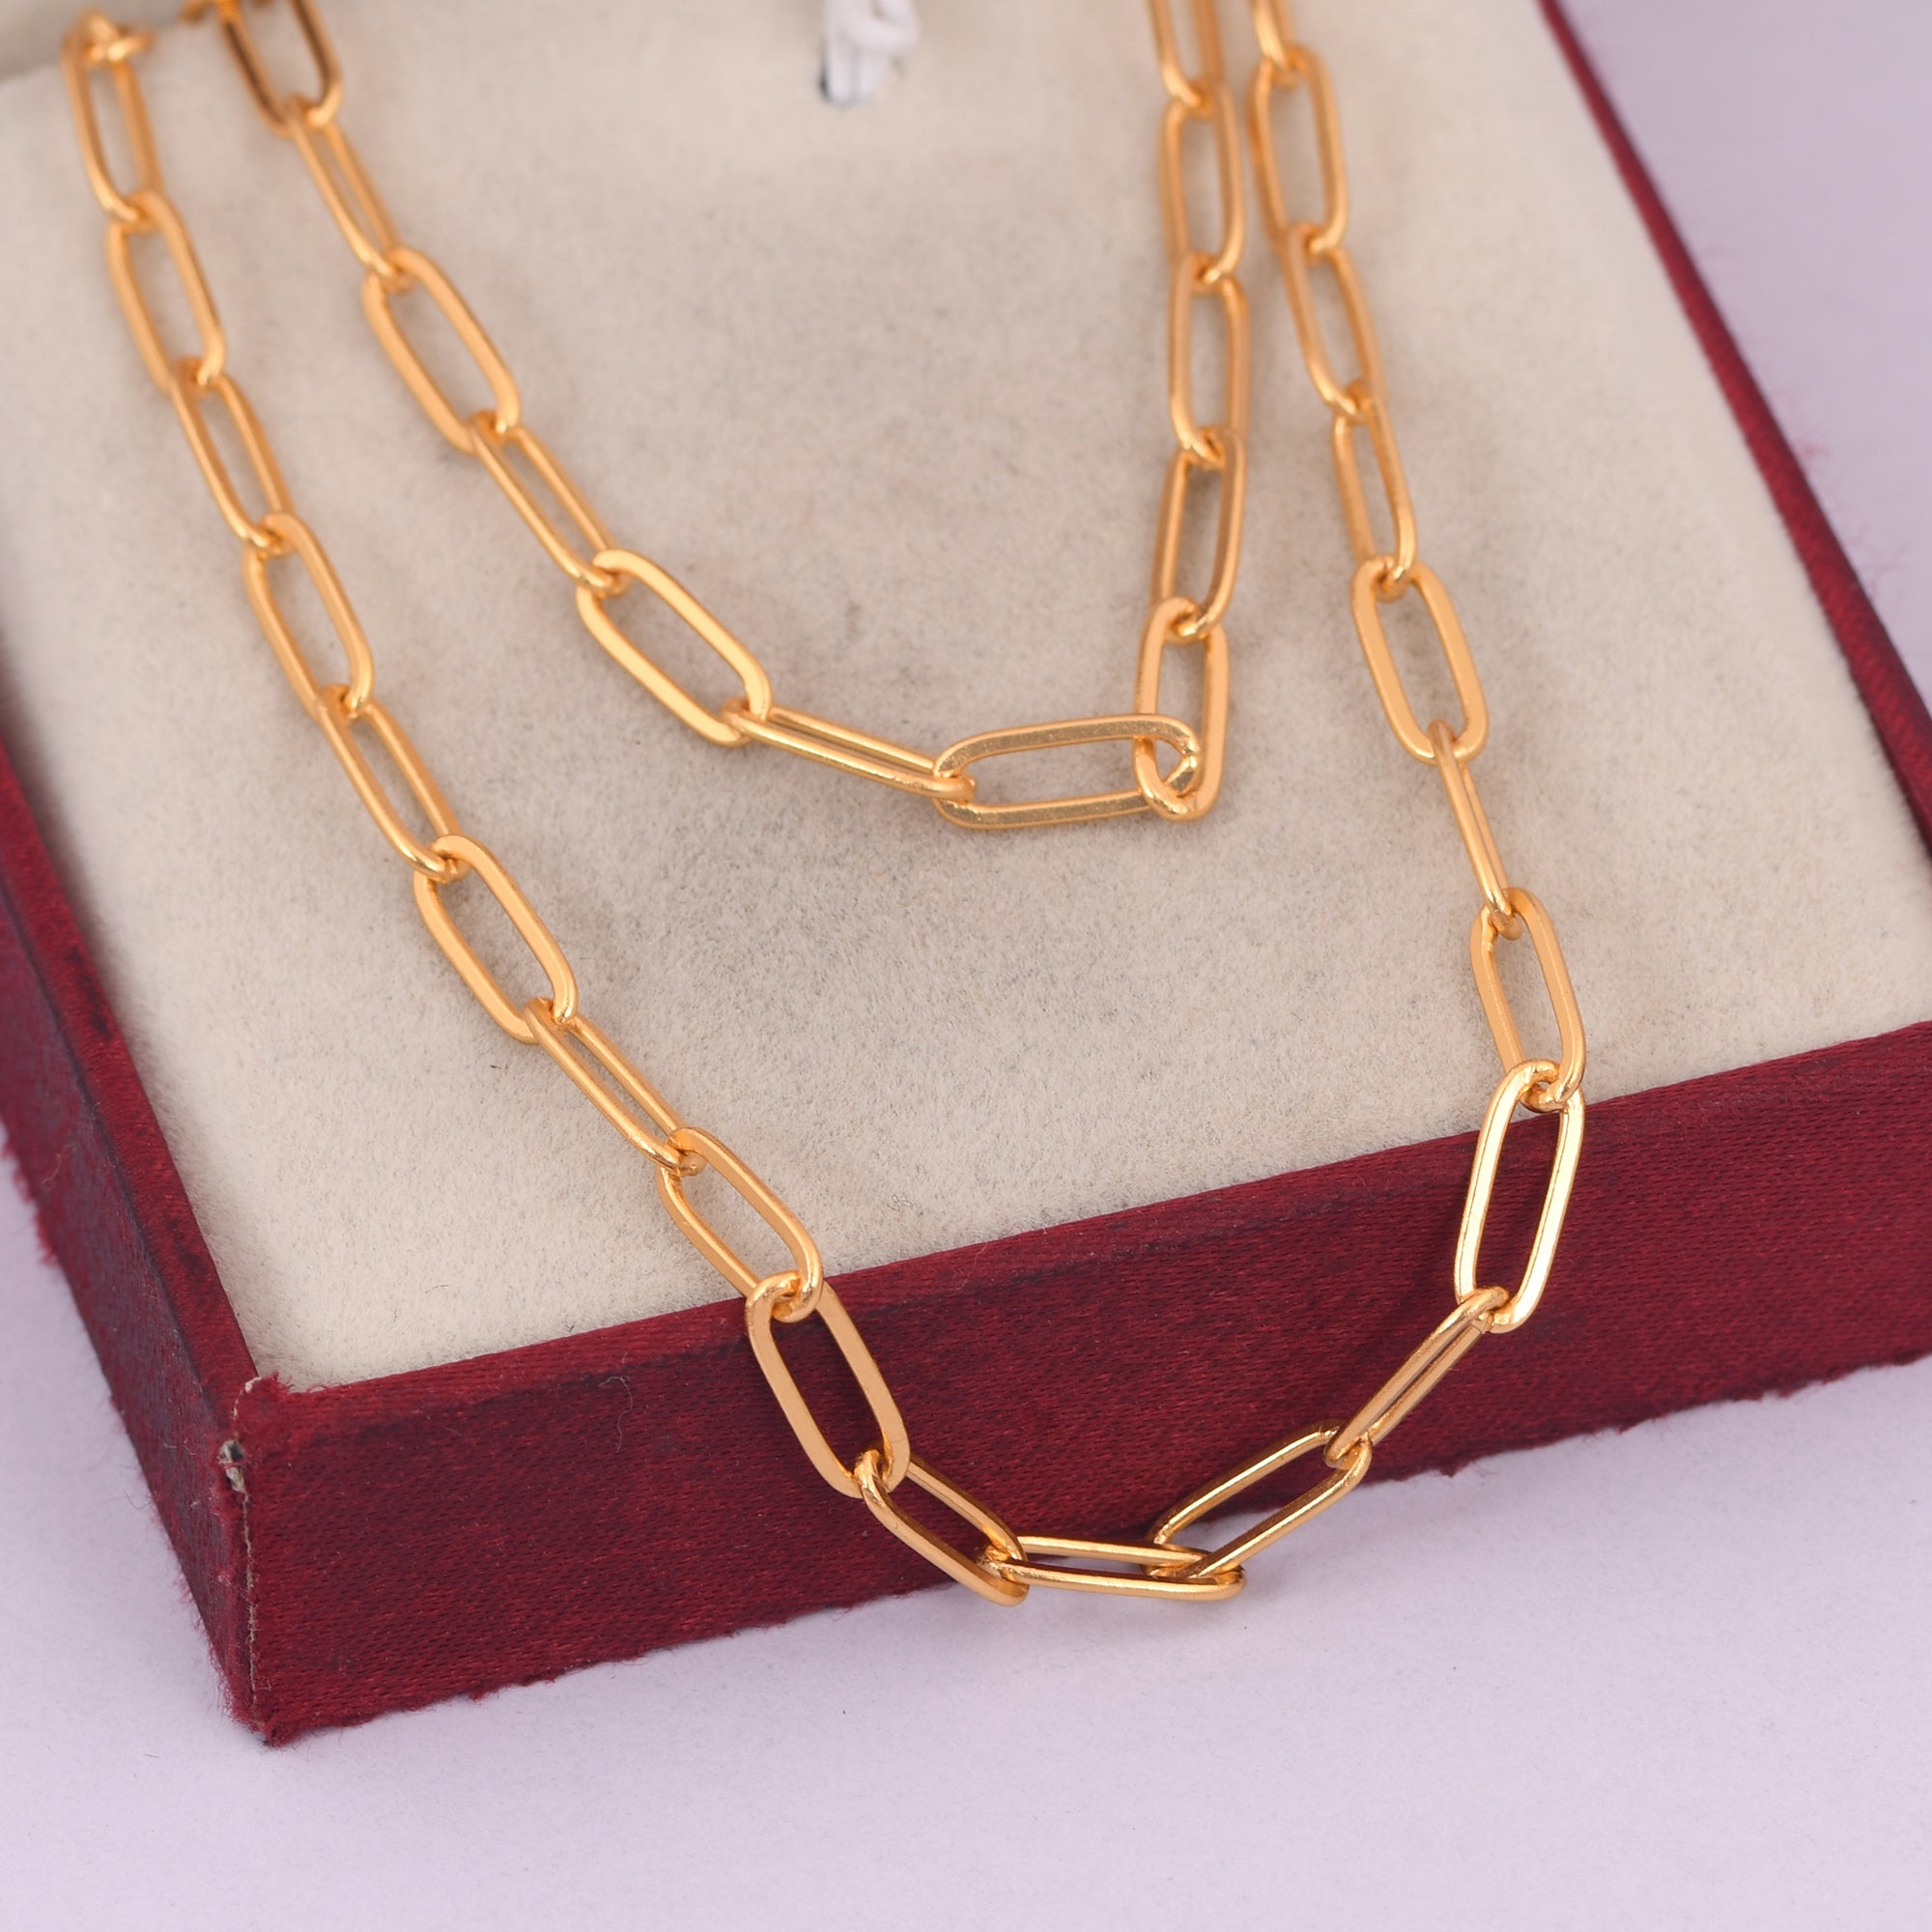 Brass Paperclip Chain - 30inch